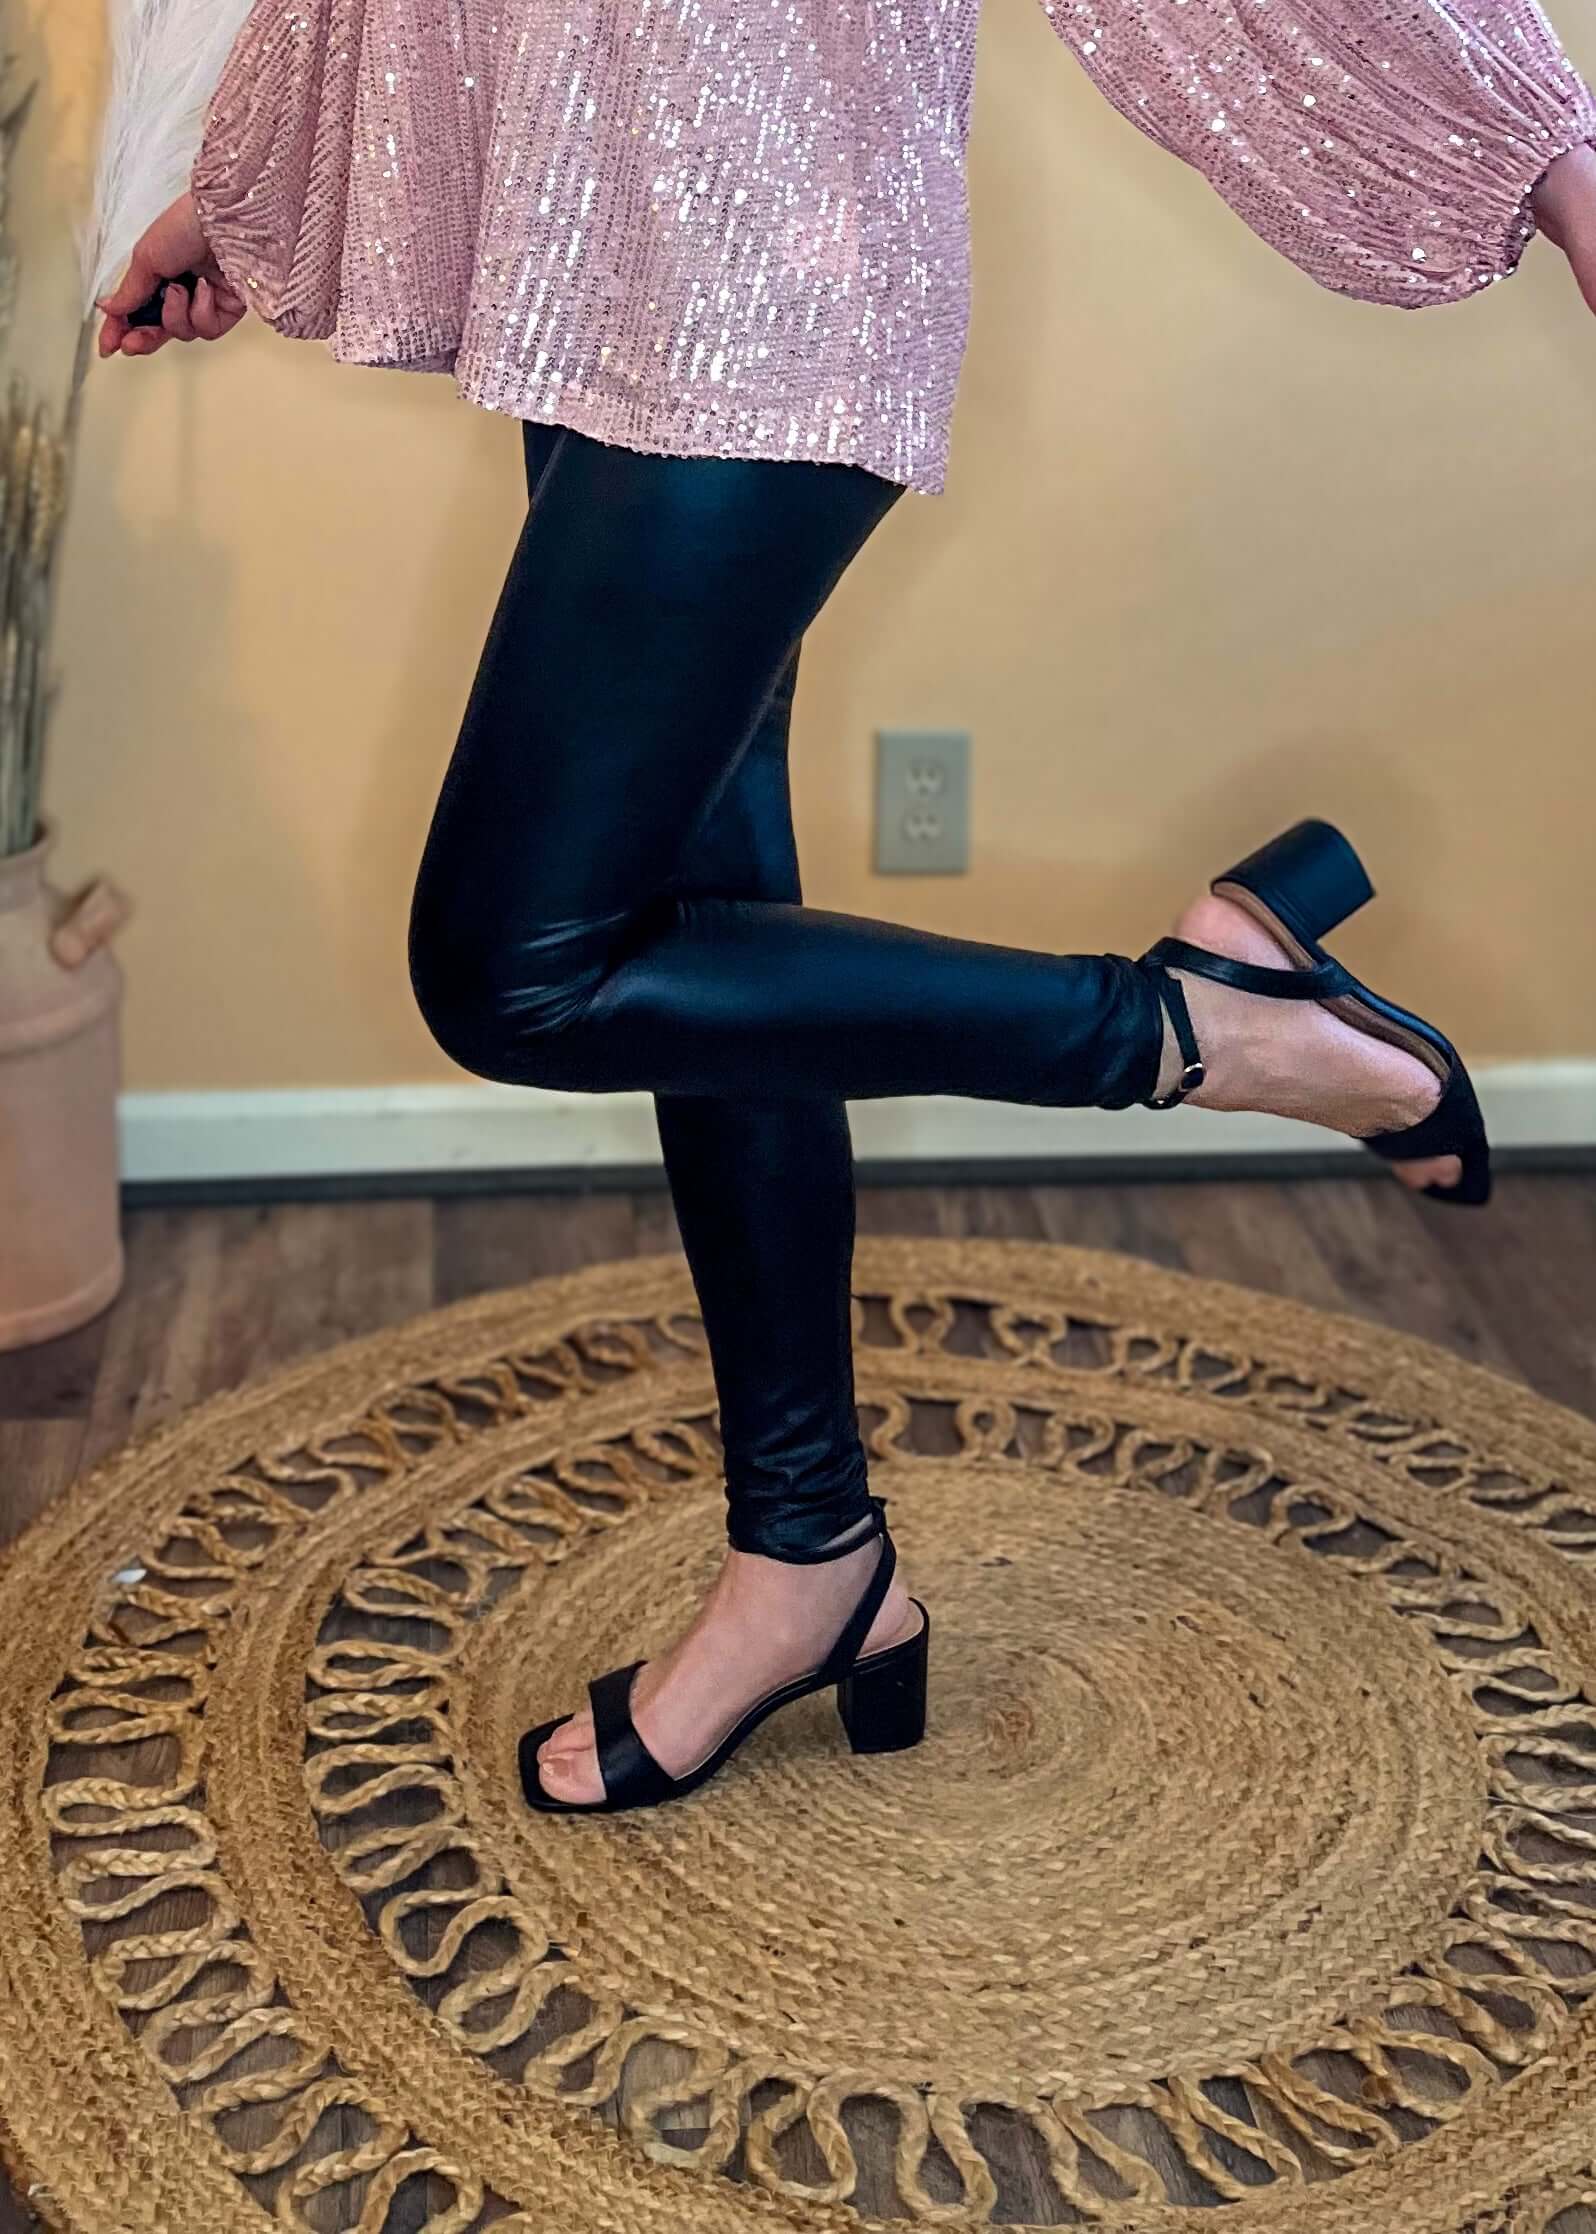 Side view of the leggings, displaying the ankle length and slim fit silhouette.